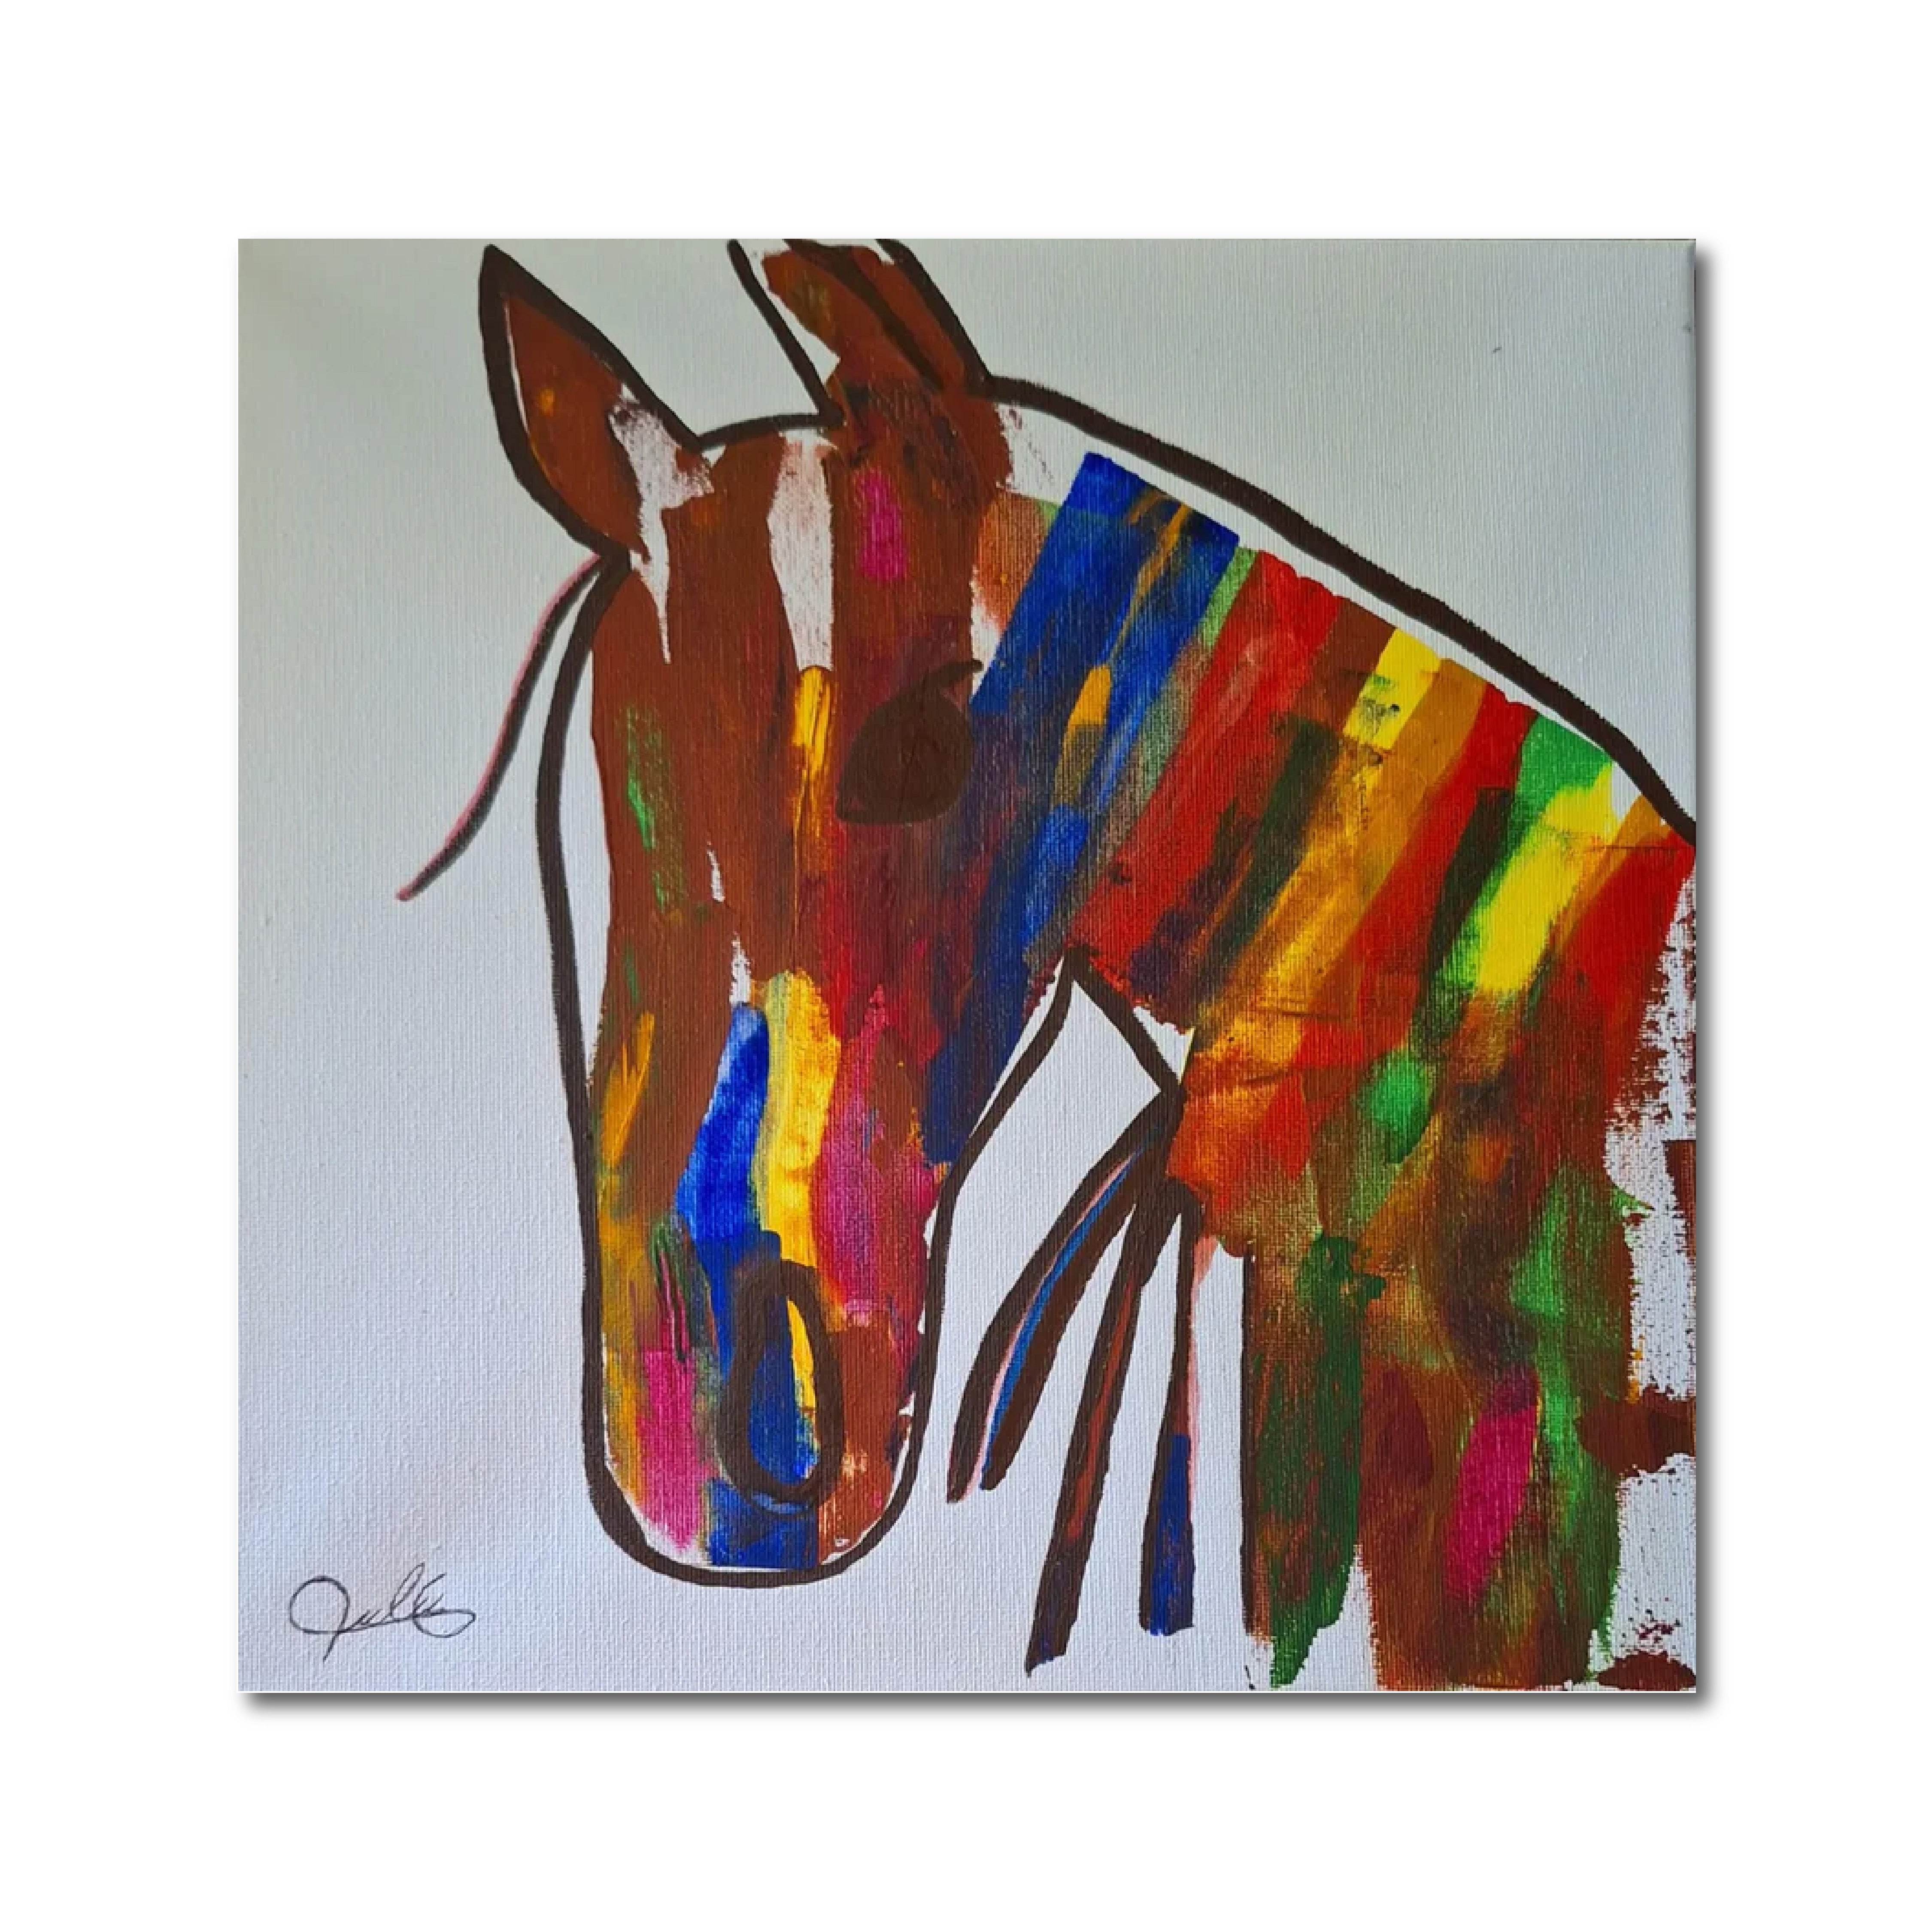 'THE HORSE' - Watercolor on Canvas